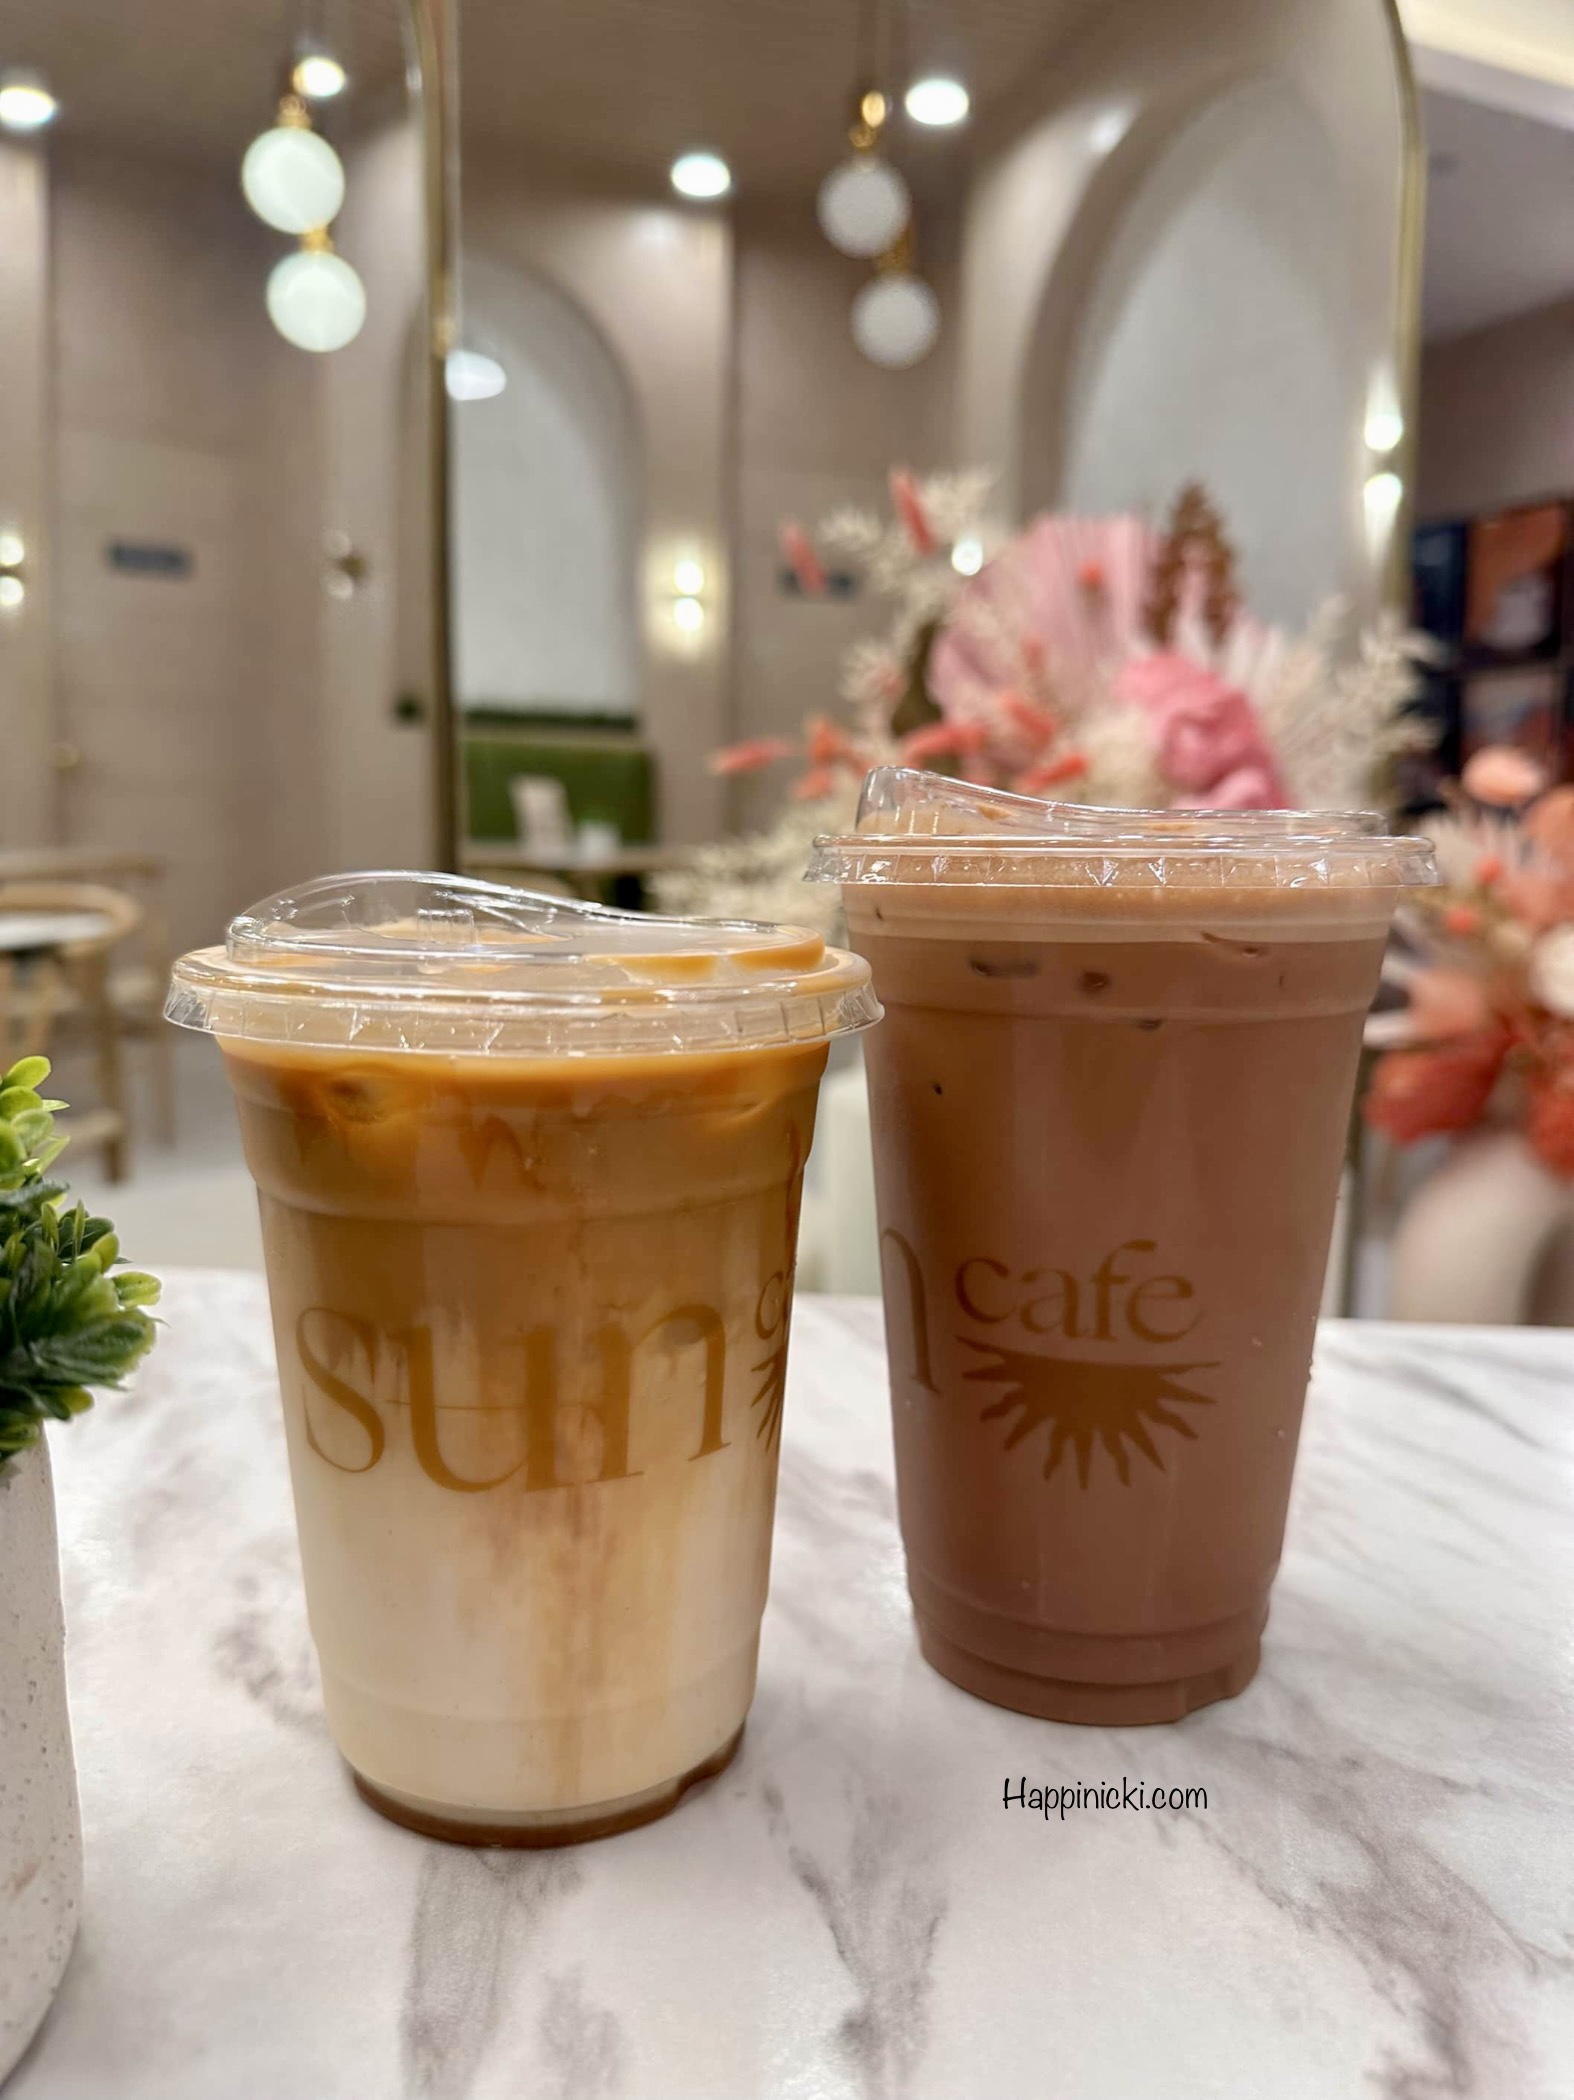 Sun Cafe: An Unexplored Coffee Shop in the City